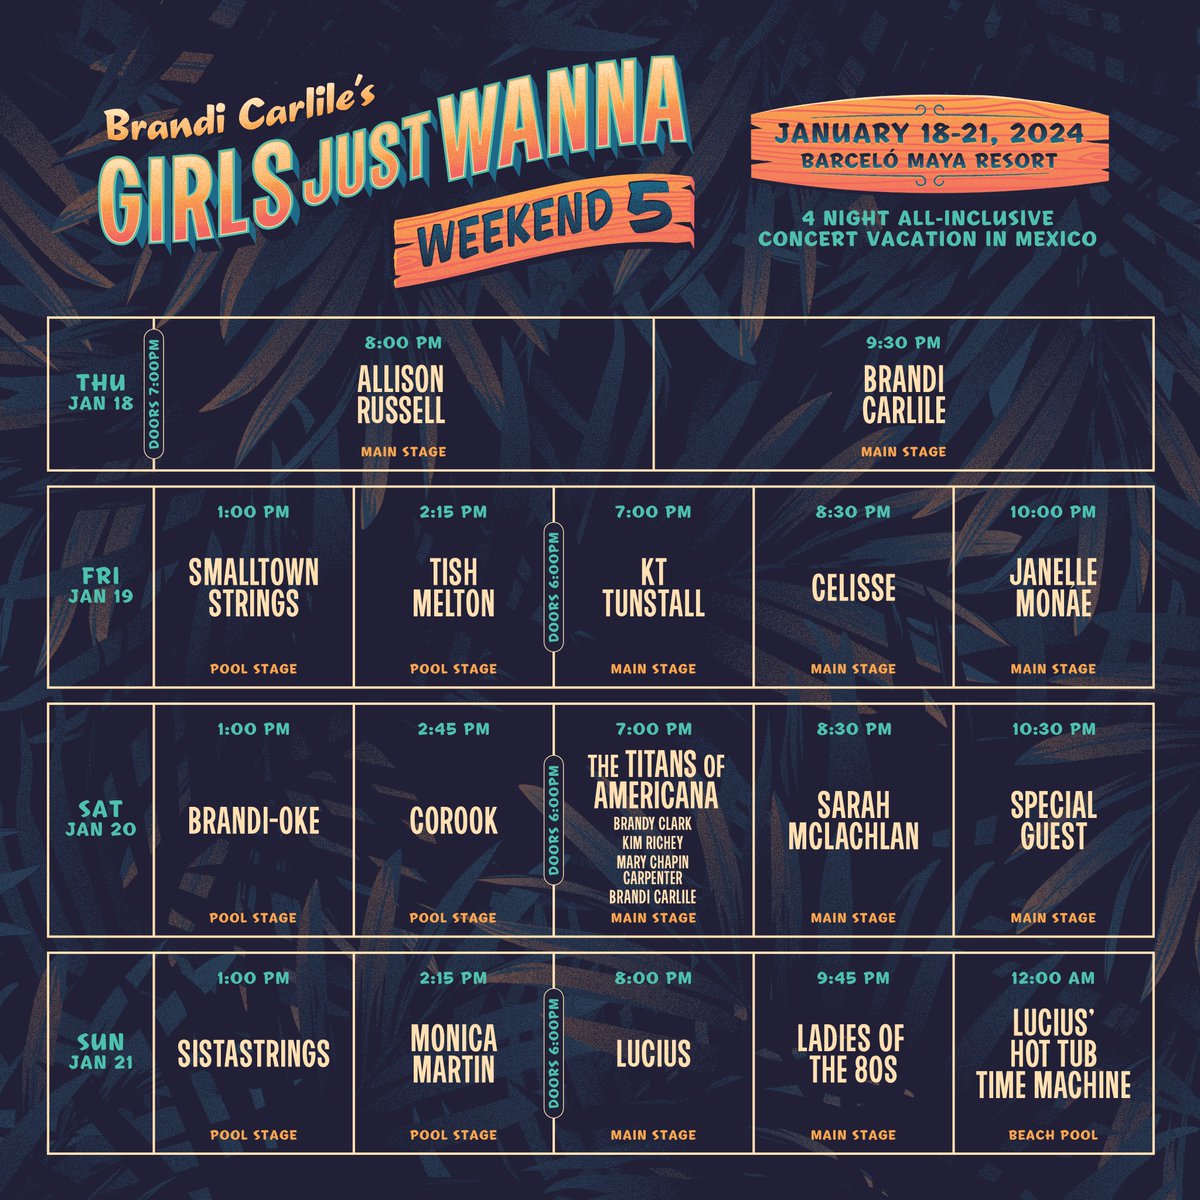 Here's the schedule for Girls just Wanna Weekend 5. I'm a Titan! Who knew? See you there!!